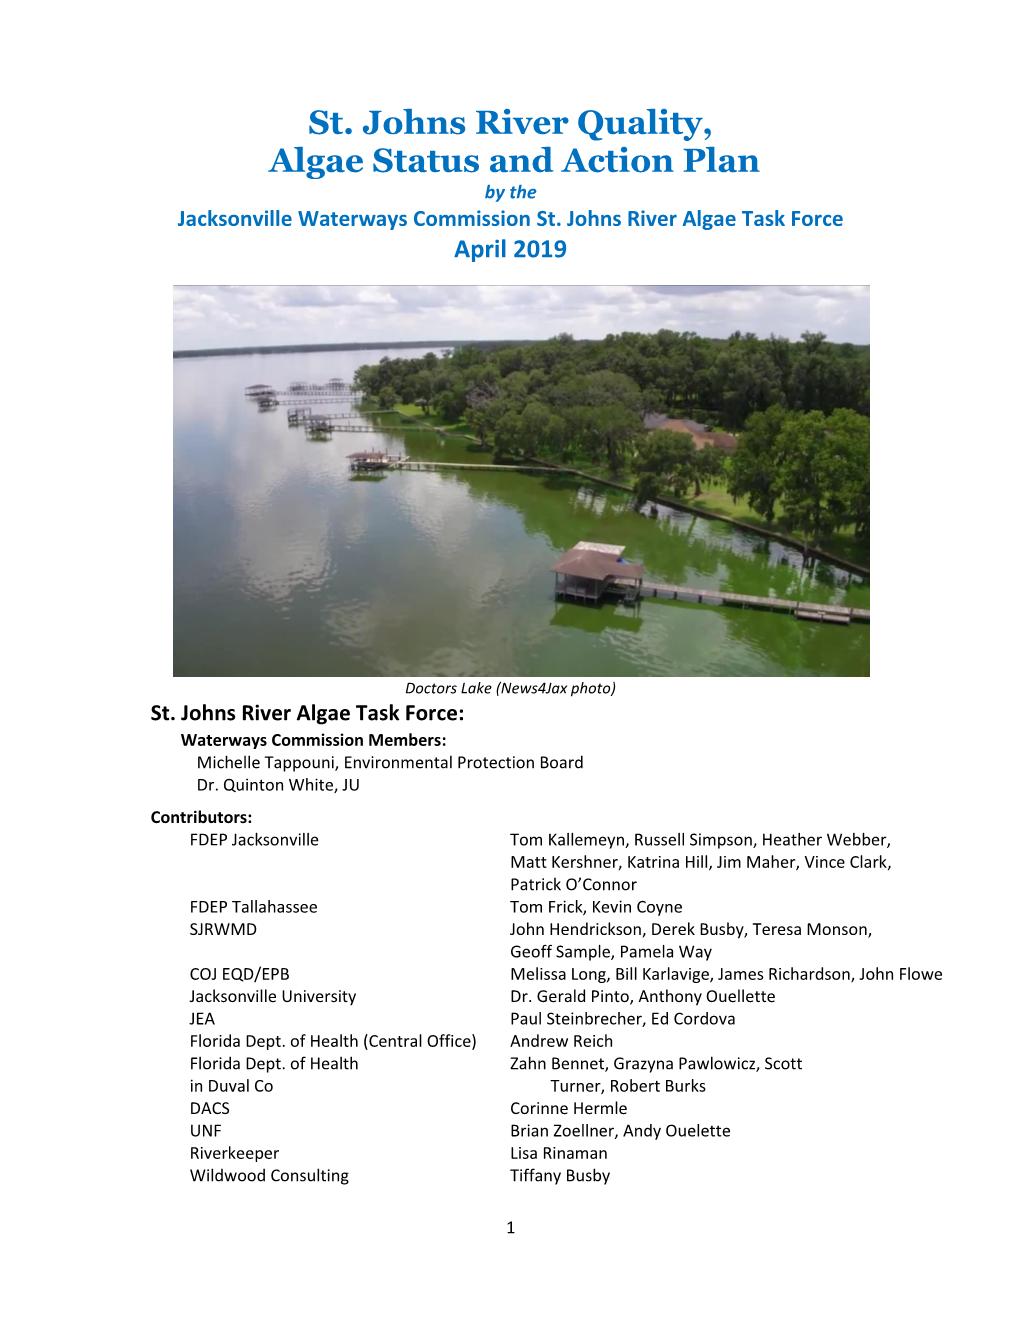 St. Johns River Quality, Algae Status and Action Plan by the Jacksonville Waterways Commission St